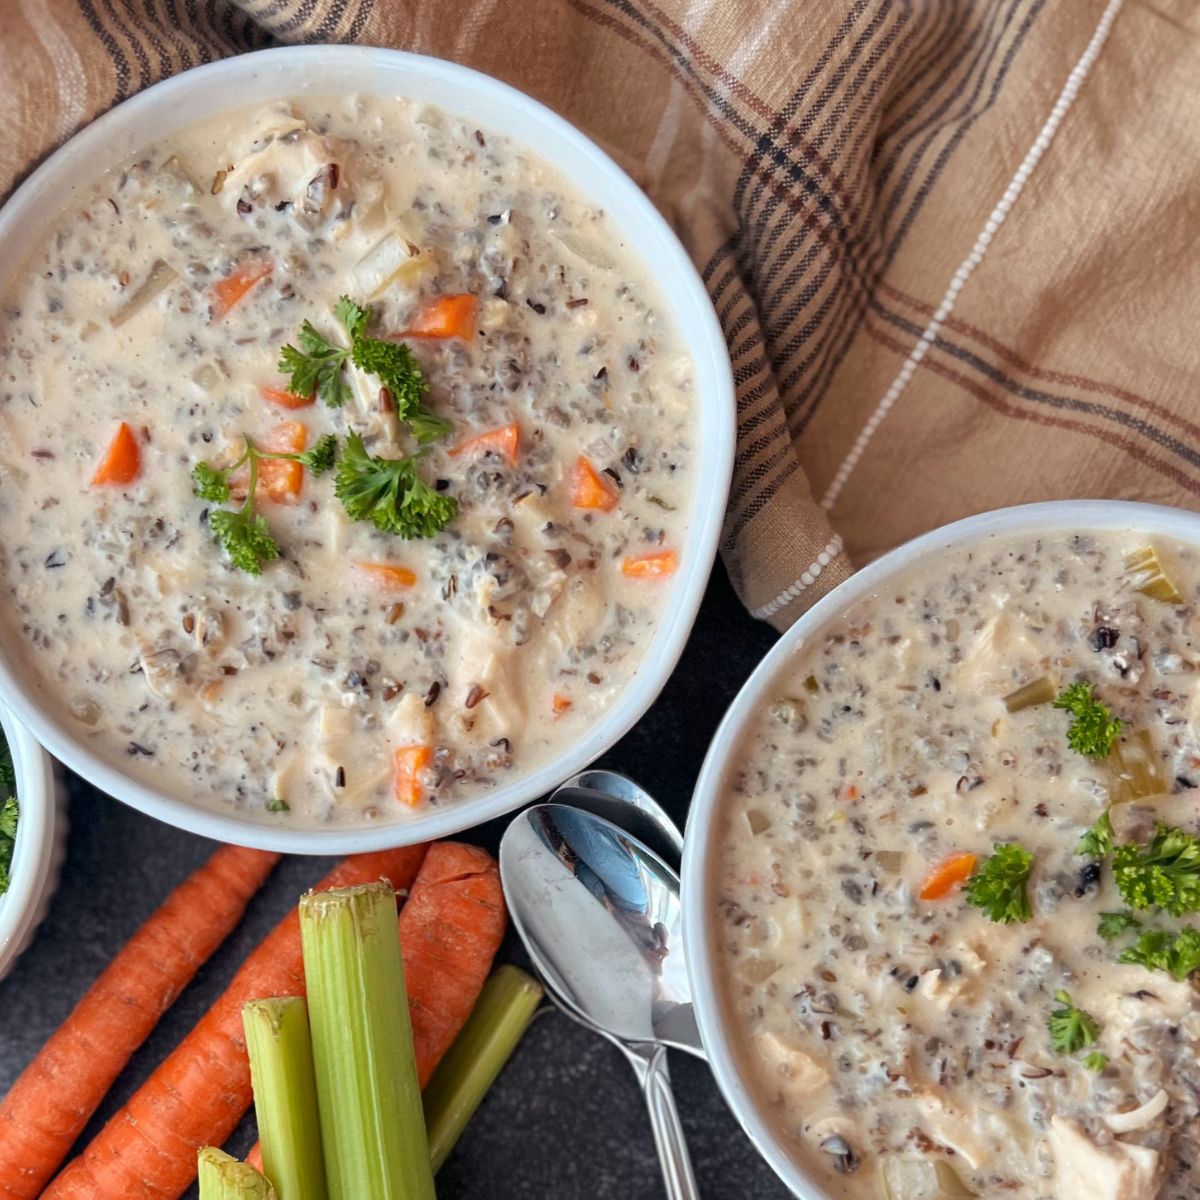 Two bowls of creamy chicken wild rice soup with carrots and celery and a towel near them.